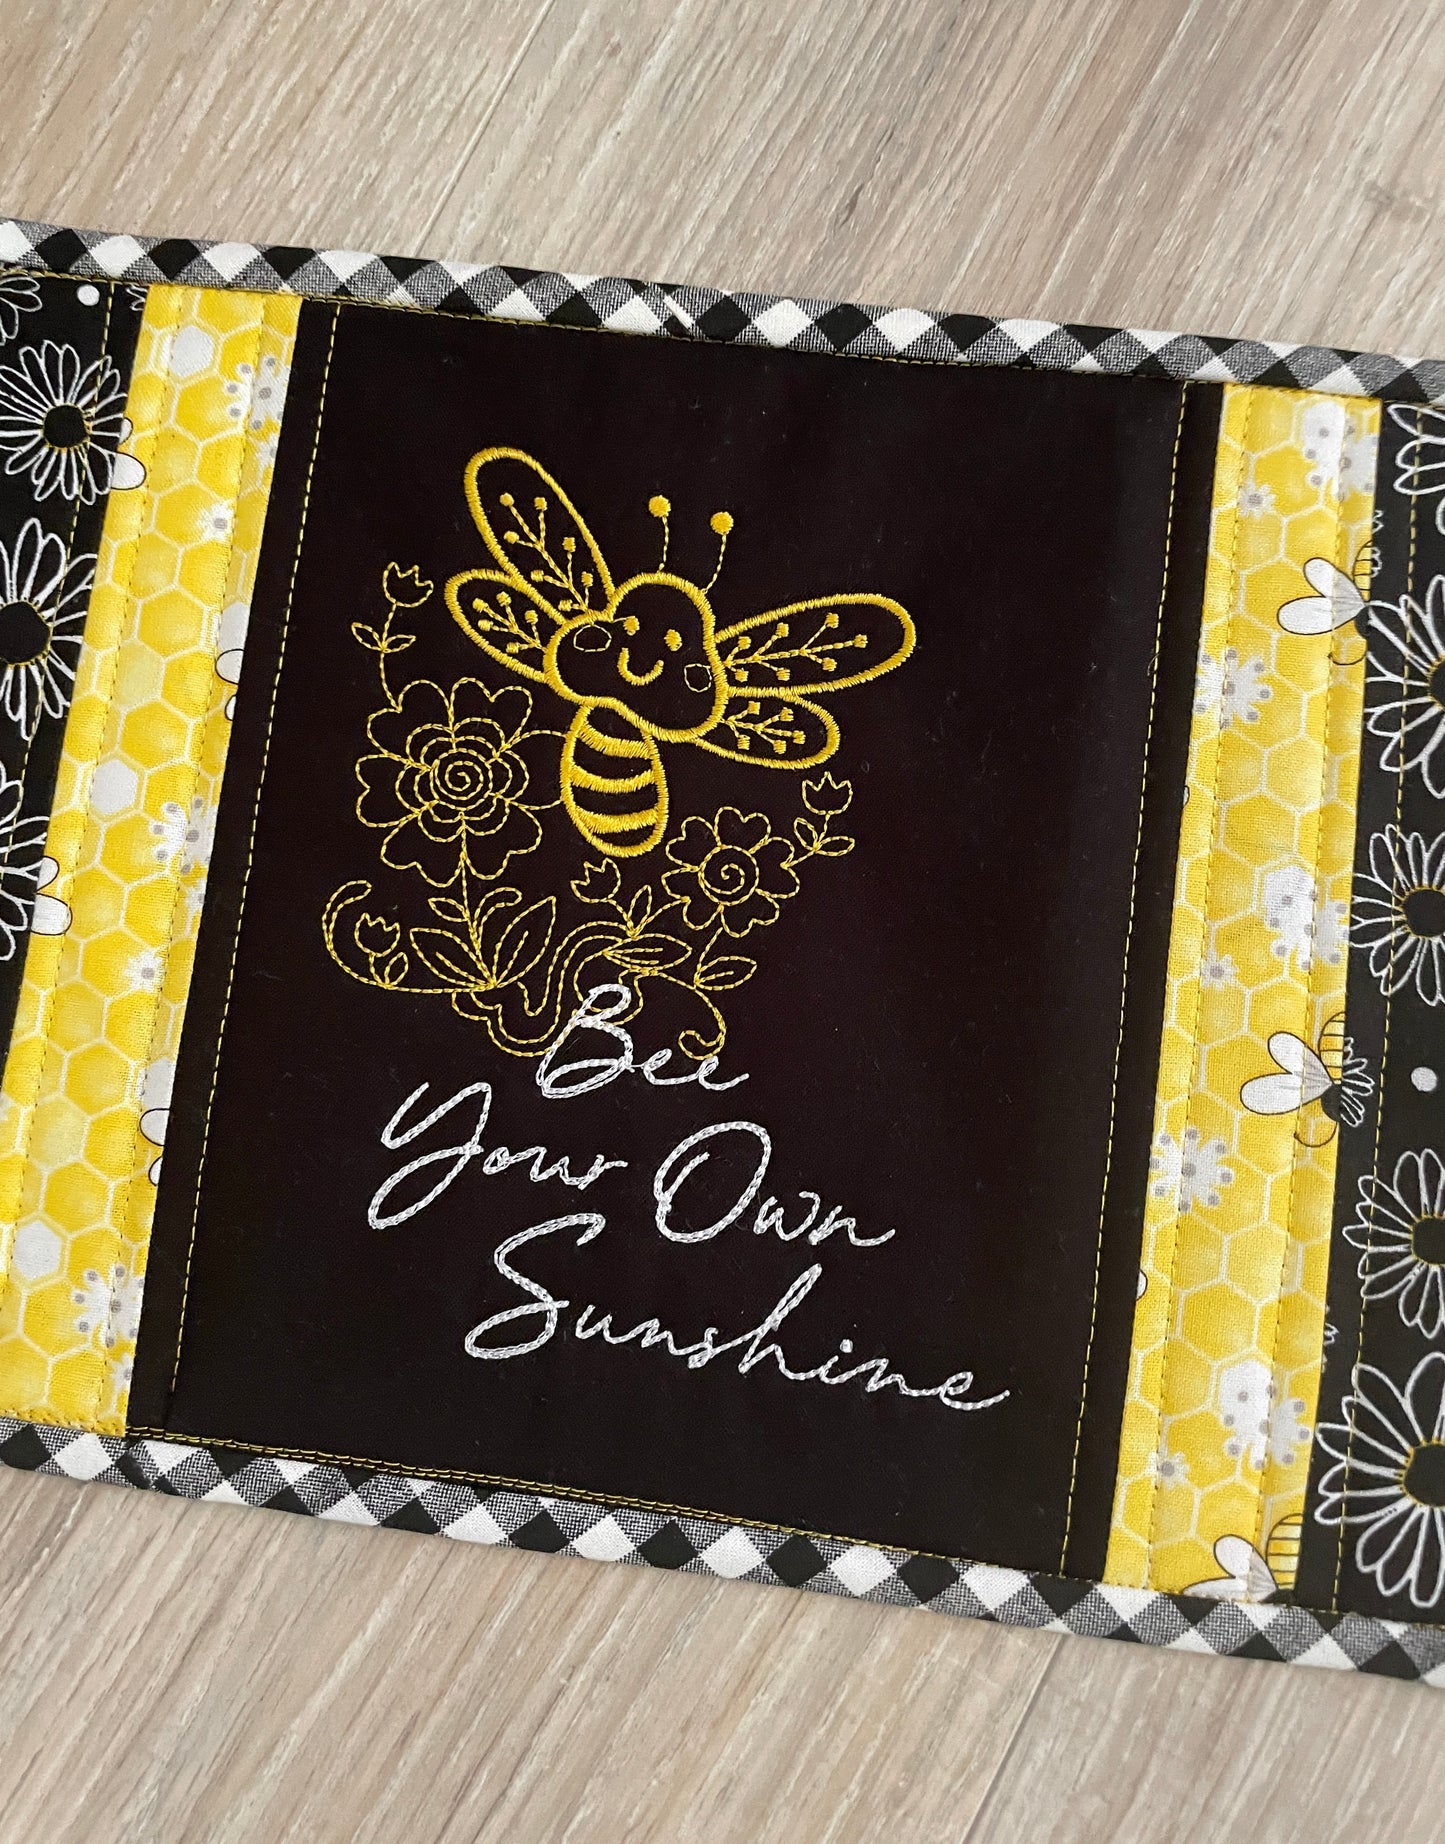 Quilted Bee Themed Fabric Mug Rug/ Coasters, Handmade Drink Protectors